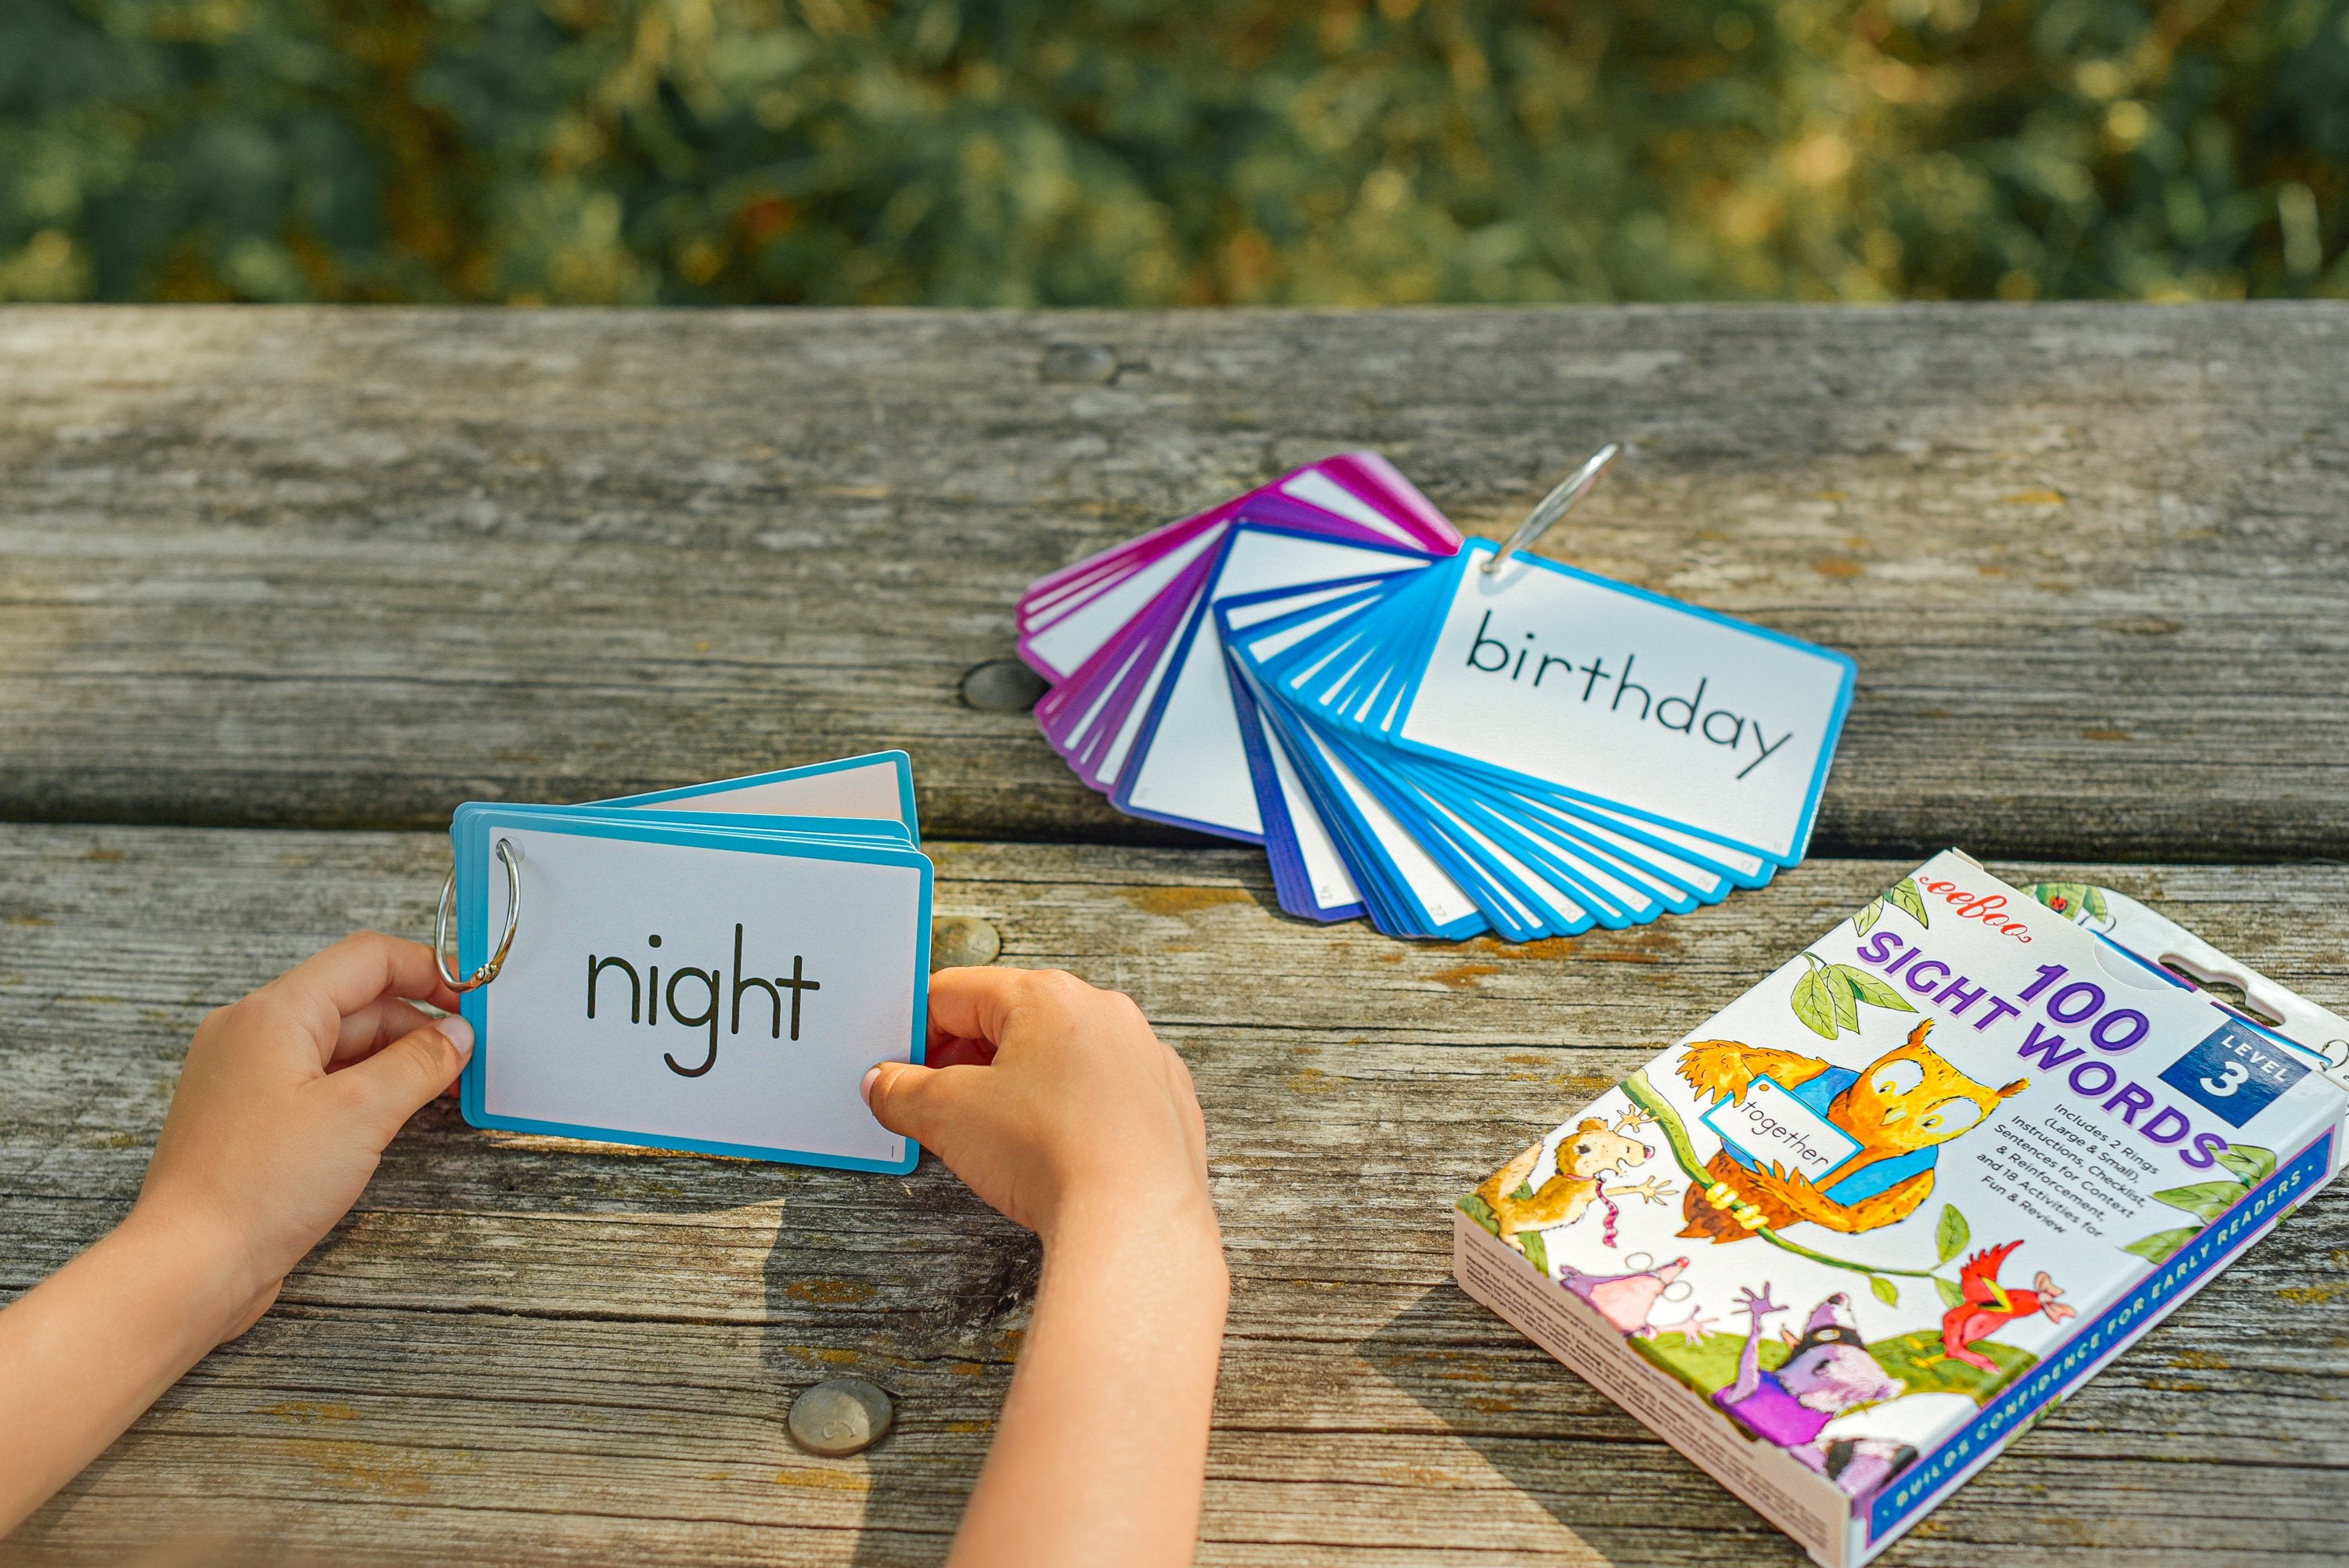 cards reading "night" and "birthday" from in the set